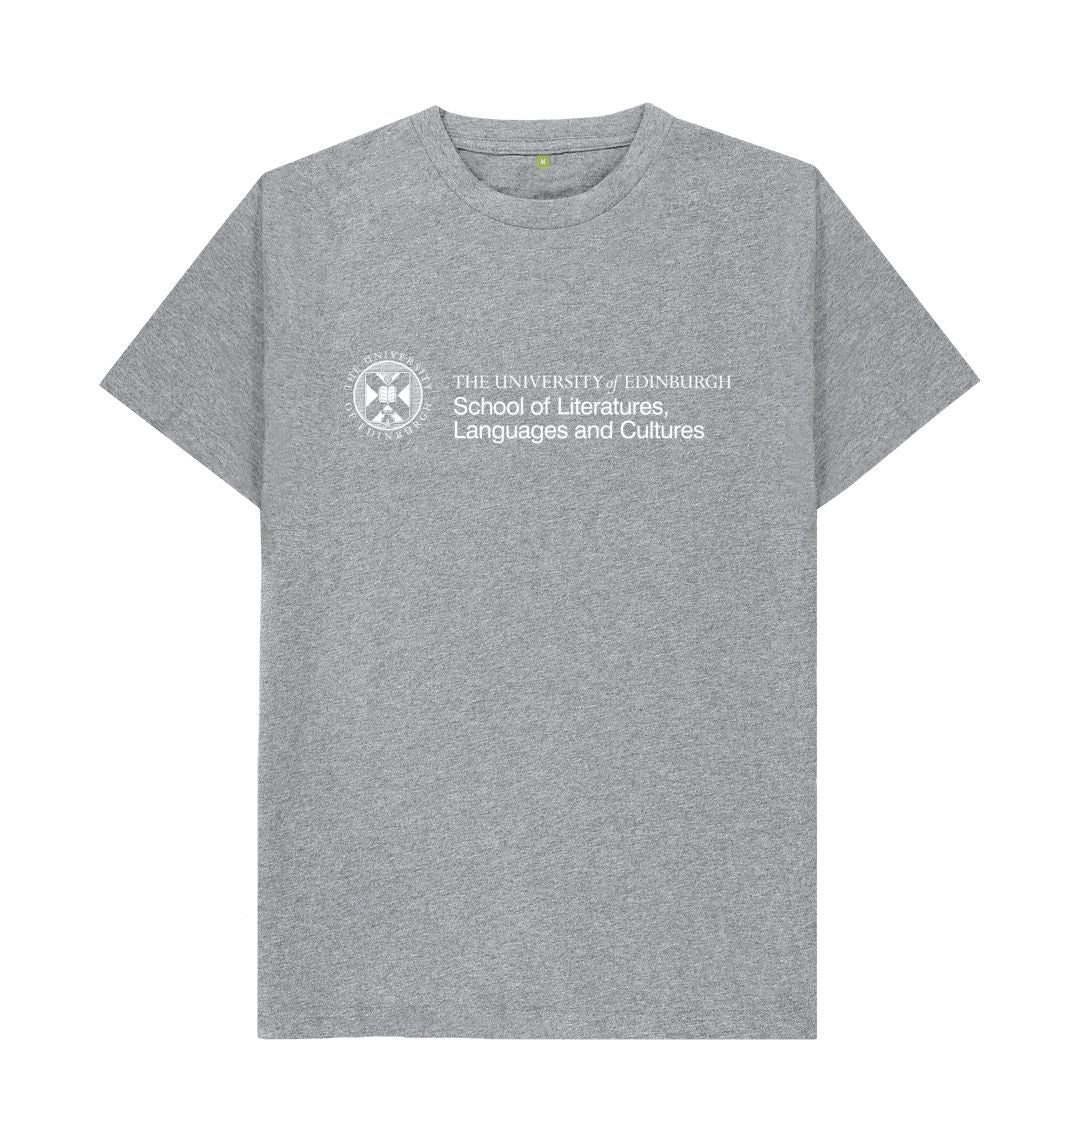 Athletic Grey School of Literatures, Languages and Cultures T-Shirt